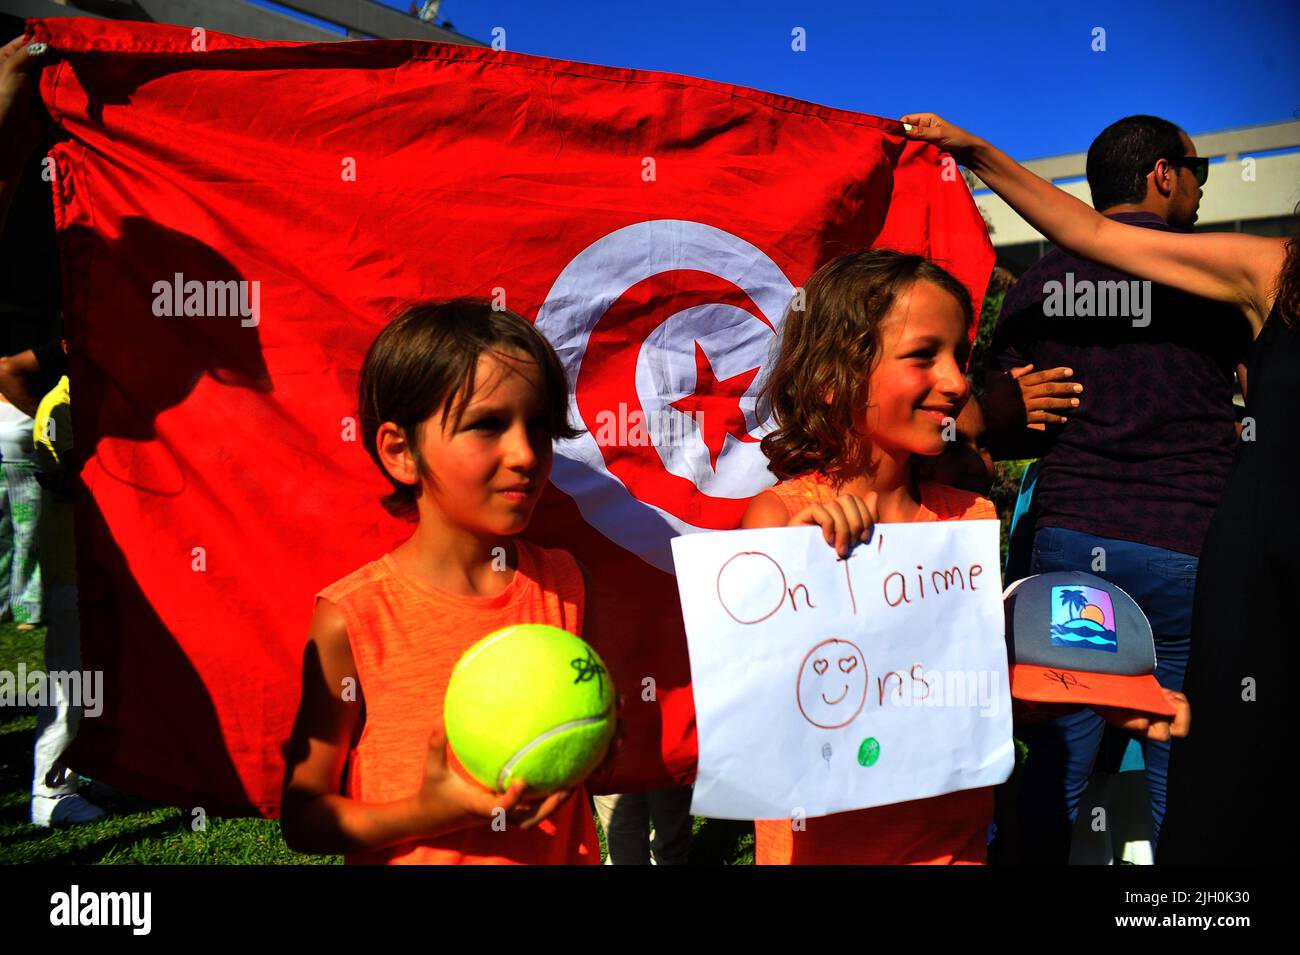 Fans of Tunisian tennis player Ons Jabeur   after her return to the capital Tunis from Wimbeldon, on July 13, 2022. Hailing her as the &quot;nation's pride&quot; and &quot;ambassador of happiness&quot;, Tunisians remained enthralled with tennis star Ons Jabeur, celebrating her presence in the prestigious Wimbledon final despite her loss. (Photo by Yassine Mahjoub/Sipa USA) Stock Photo